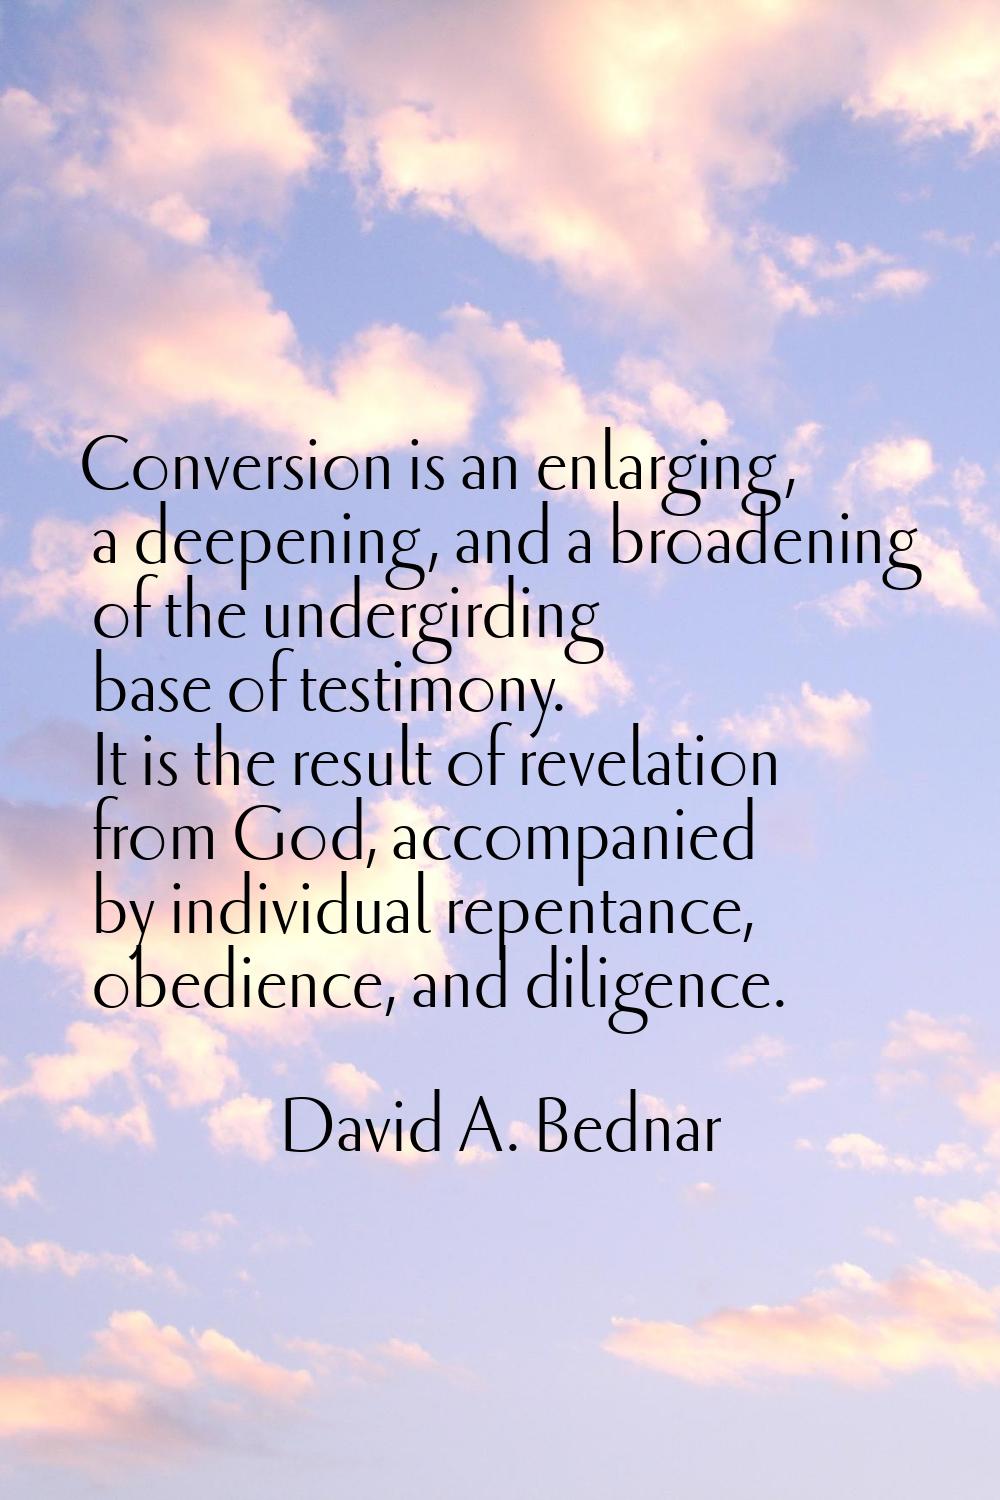 Conversion is an enlarging, a deepening, and a broadening of the undergirding base of testimony. It